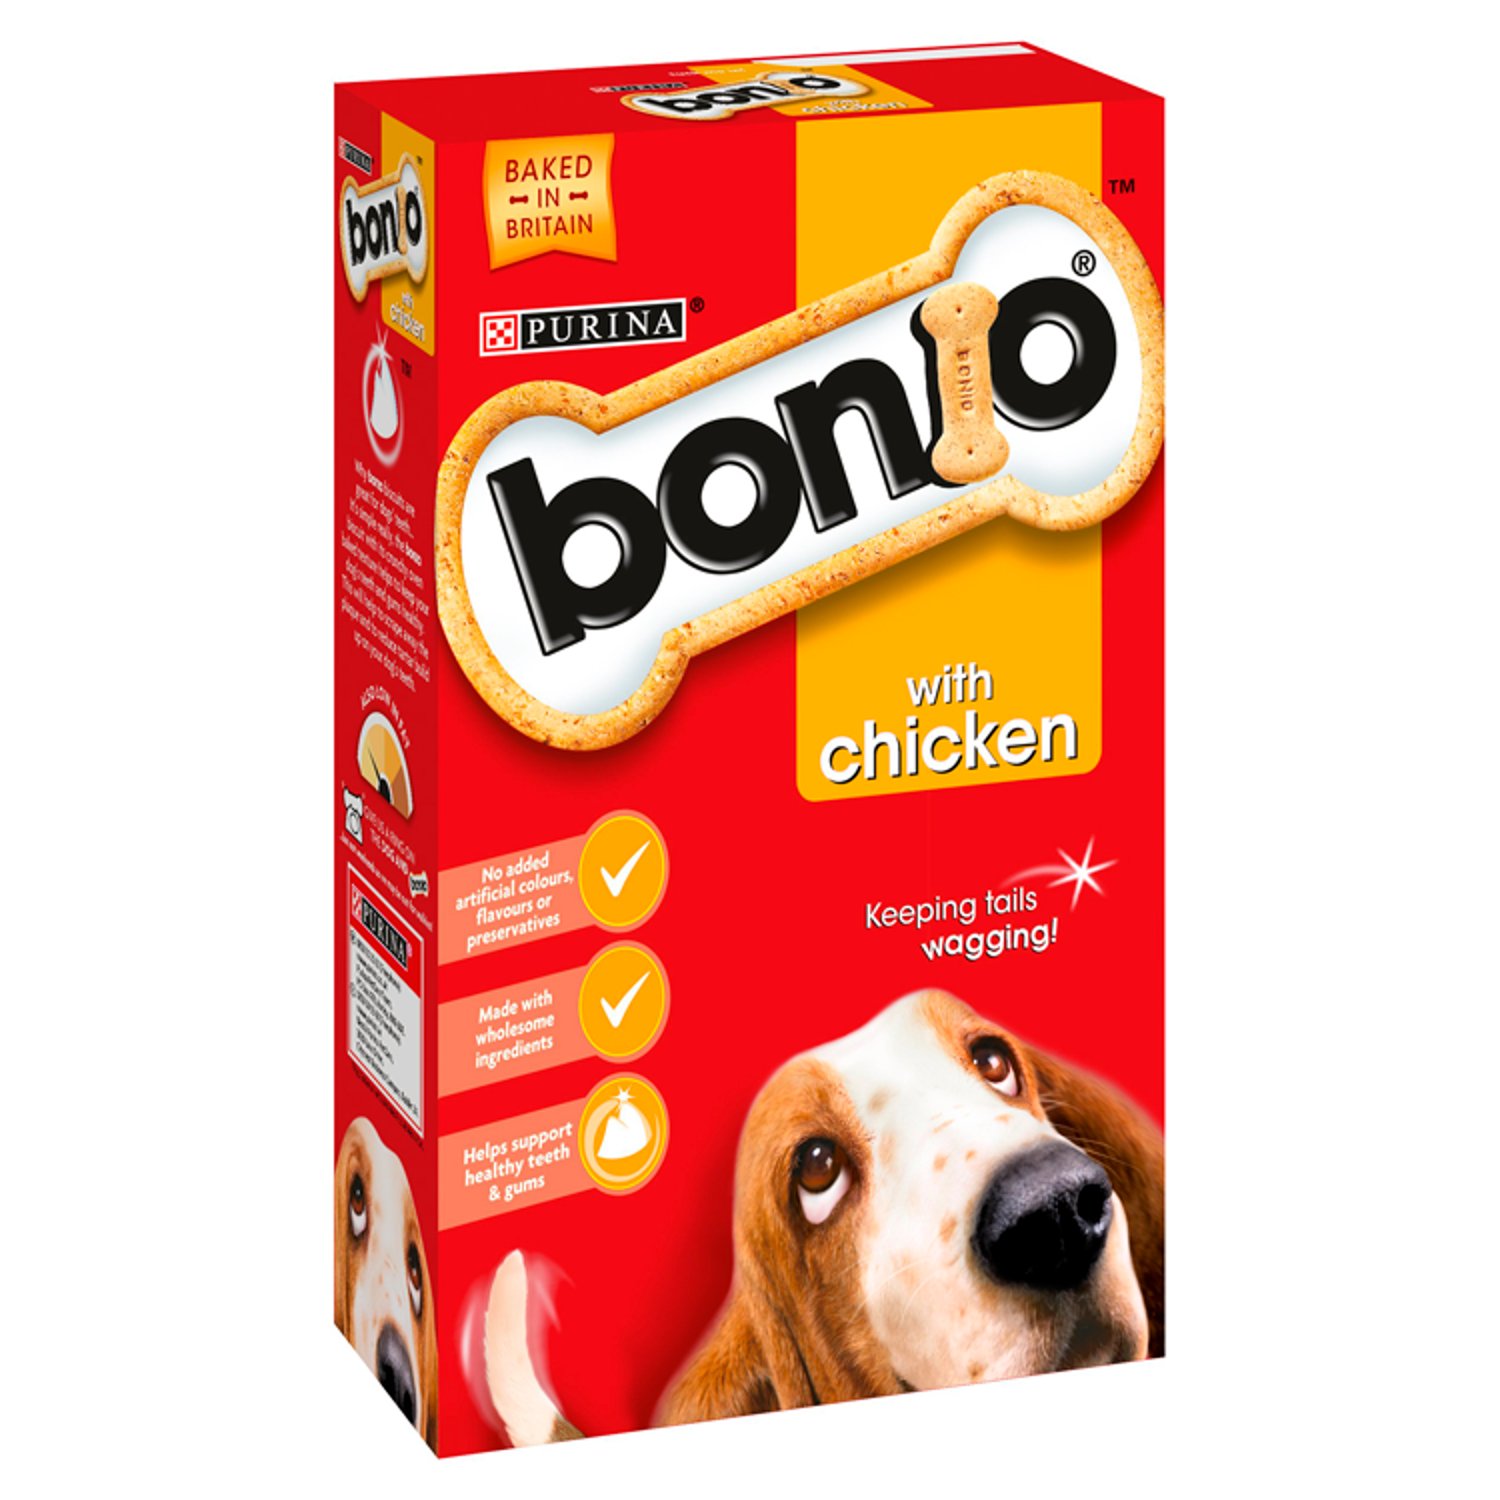 Complementary pet food for adult dogs.

Your dog won't be able to resist our mouth-watering tasty BONIO® Adult dog biscuits.

Traditionally and lovingly oven-baked, our delicious dog treats are the perfect snack morning, noon and night! Take them on your walk or play a game and hide them for your dog to find, whichever the way you treat your dog, we're sure he'll be happy!

We use carefully selected ingredients including wholegrains in our tasty BONIO® Adult dog biscuits to help keep him healthy and happy. Our BONIO® Adult dog biscuits also has the delicious taste of chicken to help get your dog's tail wagging!

A great way to help keep your dog's teeth healthy! The crunchy oven-baked texture helps reduce the build up of tartar and helps remove plaque.